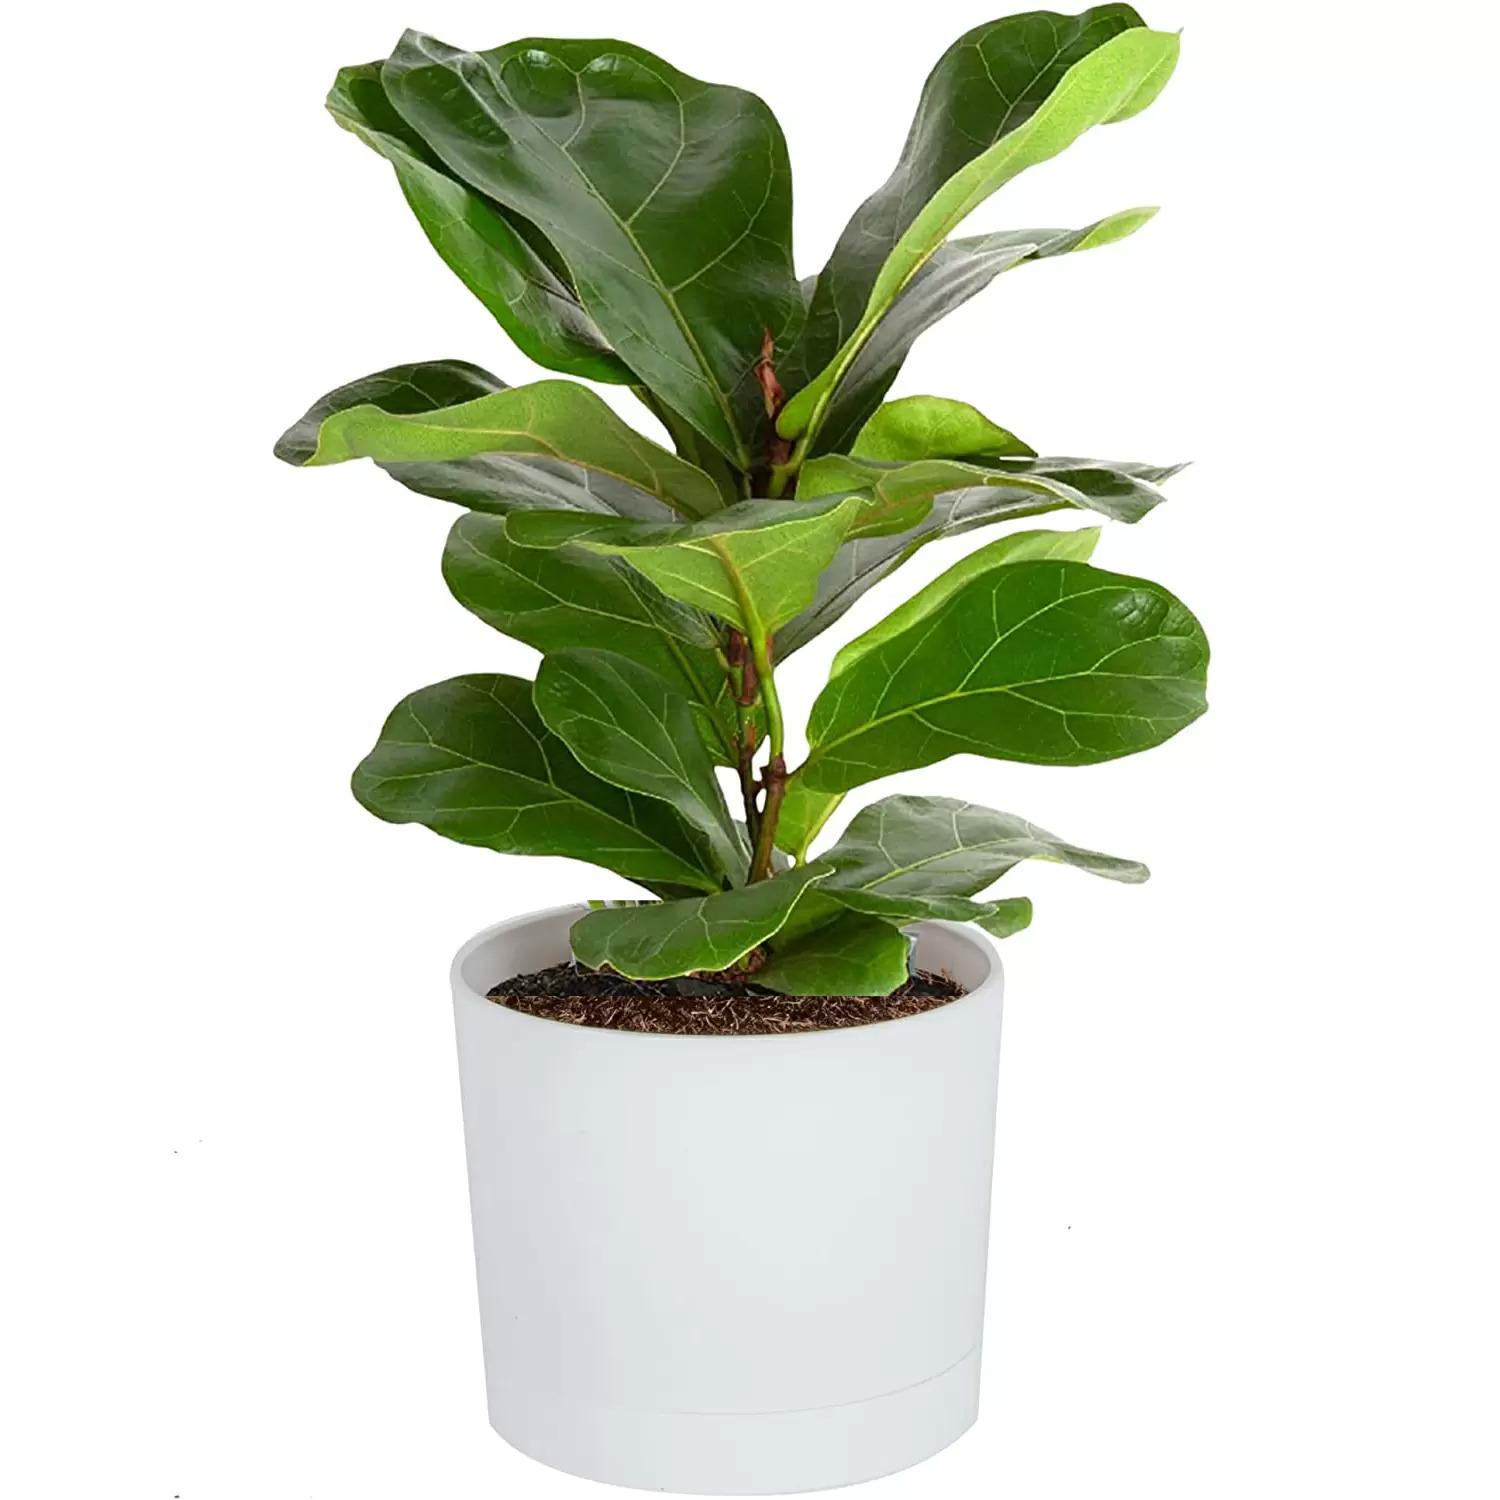 Costa Farms Live Indoor Plant for $16.63